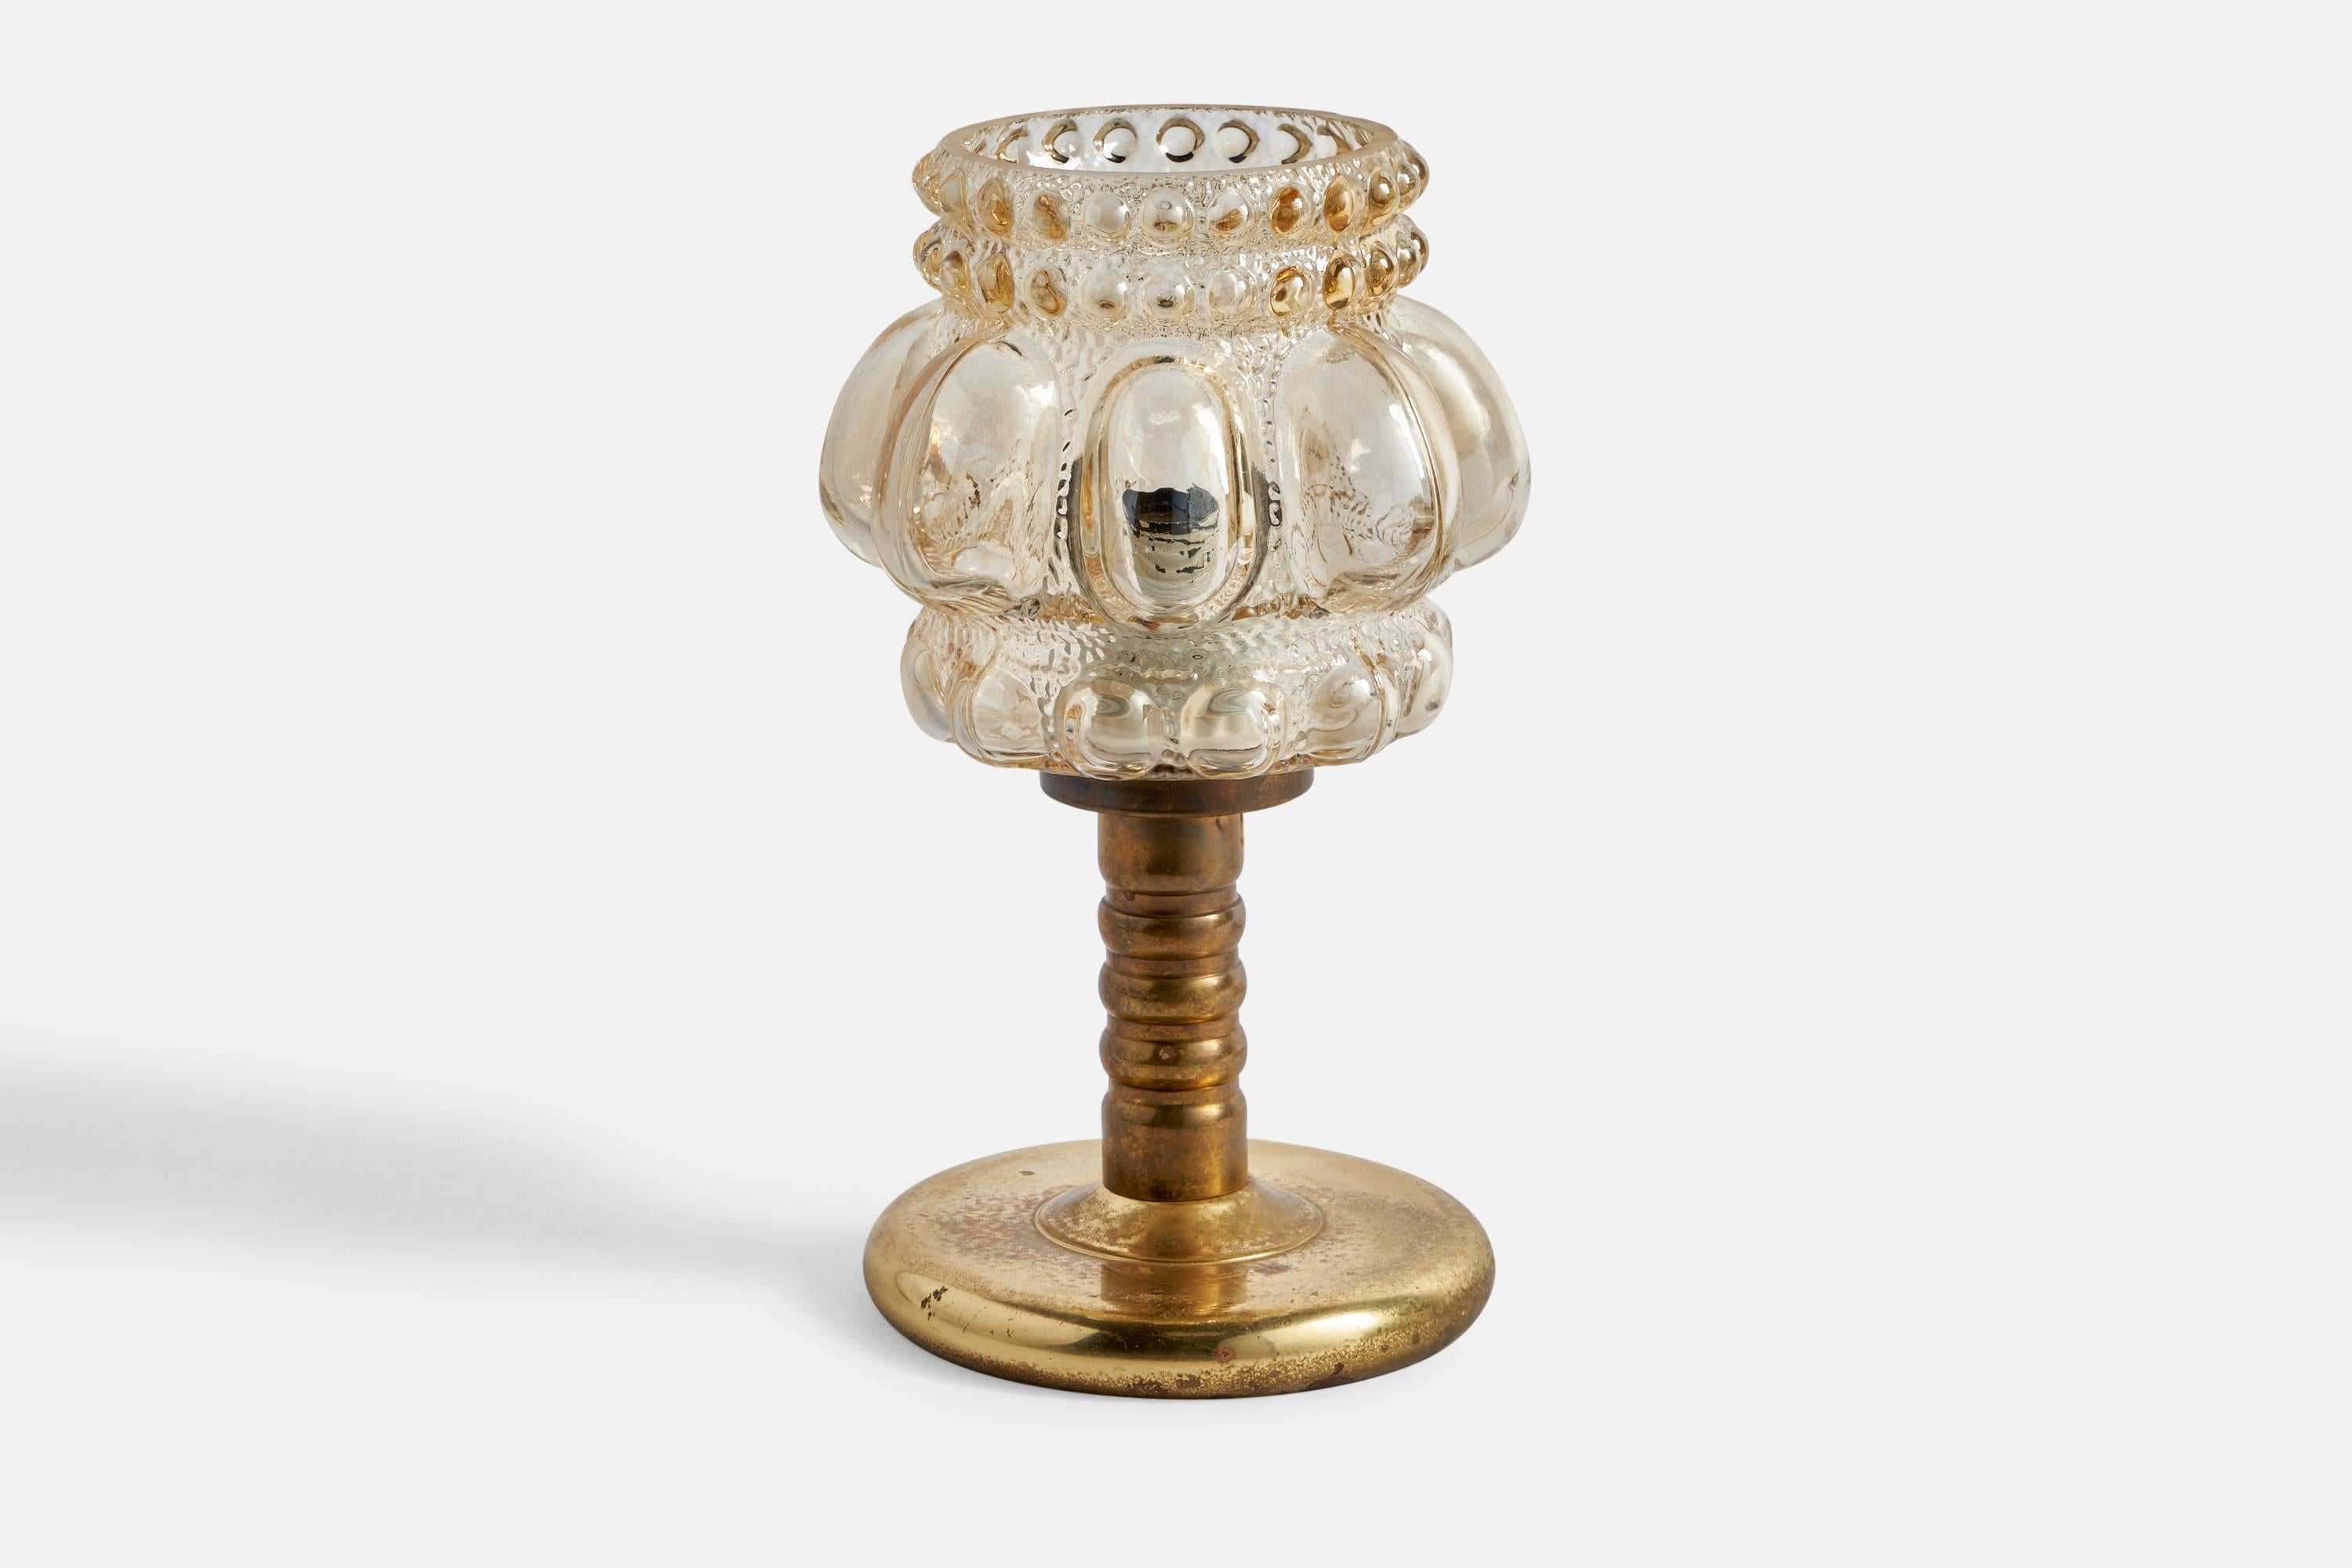 A glass and brass table lamp designed by Helena Tynell and produced by Glashütte Limburg, Germany, c. 1960s.

Overall Dimensions (inches): 9.55” H x 5.65” Diameter
Bulb Specifications: E-26 Bulb
Number of Sockets: 1
All lighting will be converted